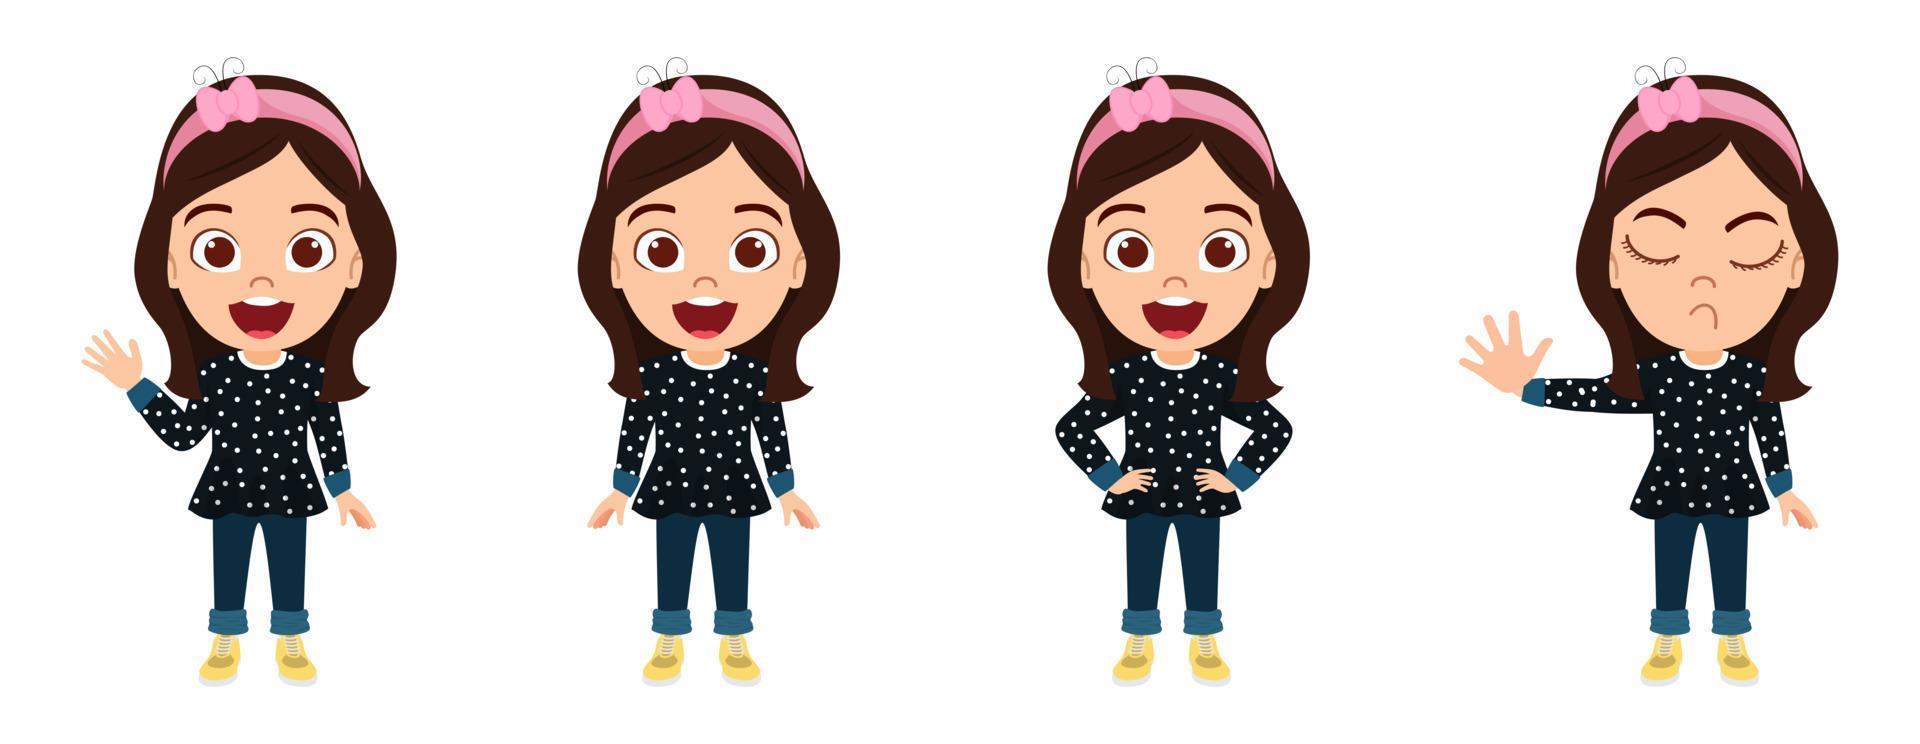 Cute beautiful kid girl character standing and posing doing different actions vector